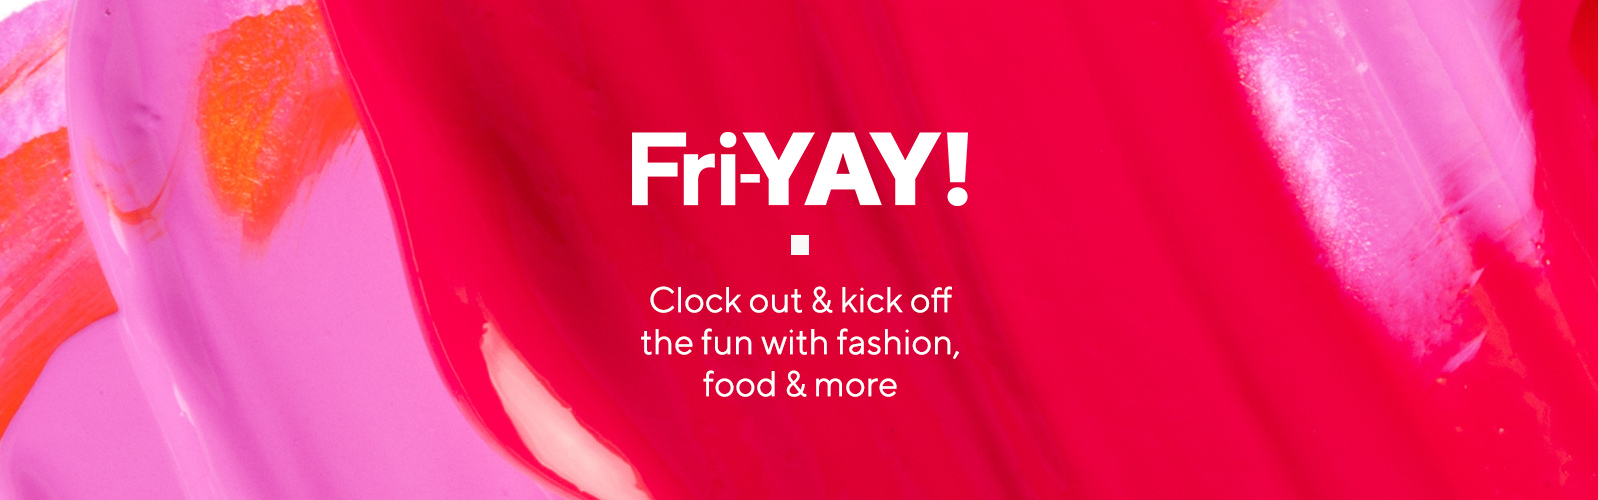 Fri-YAY  Clock out & kick off the fun with fashion, food & more